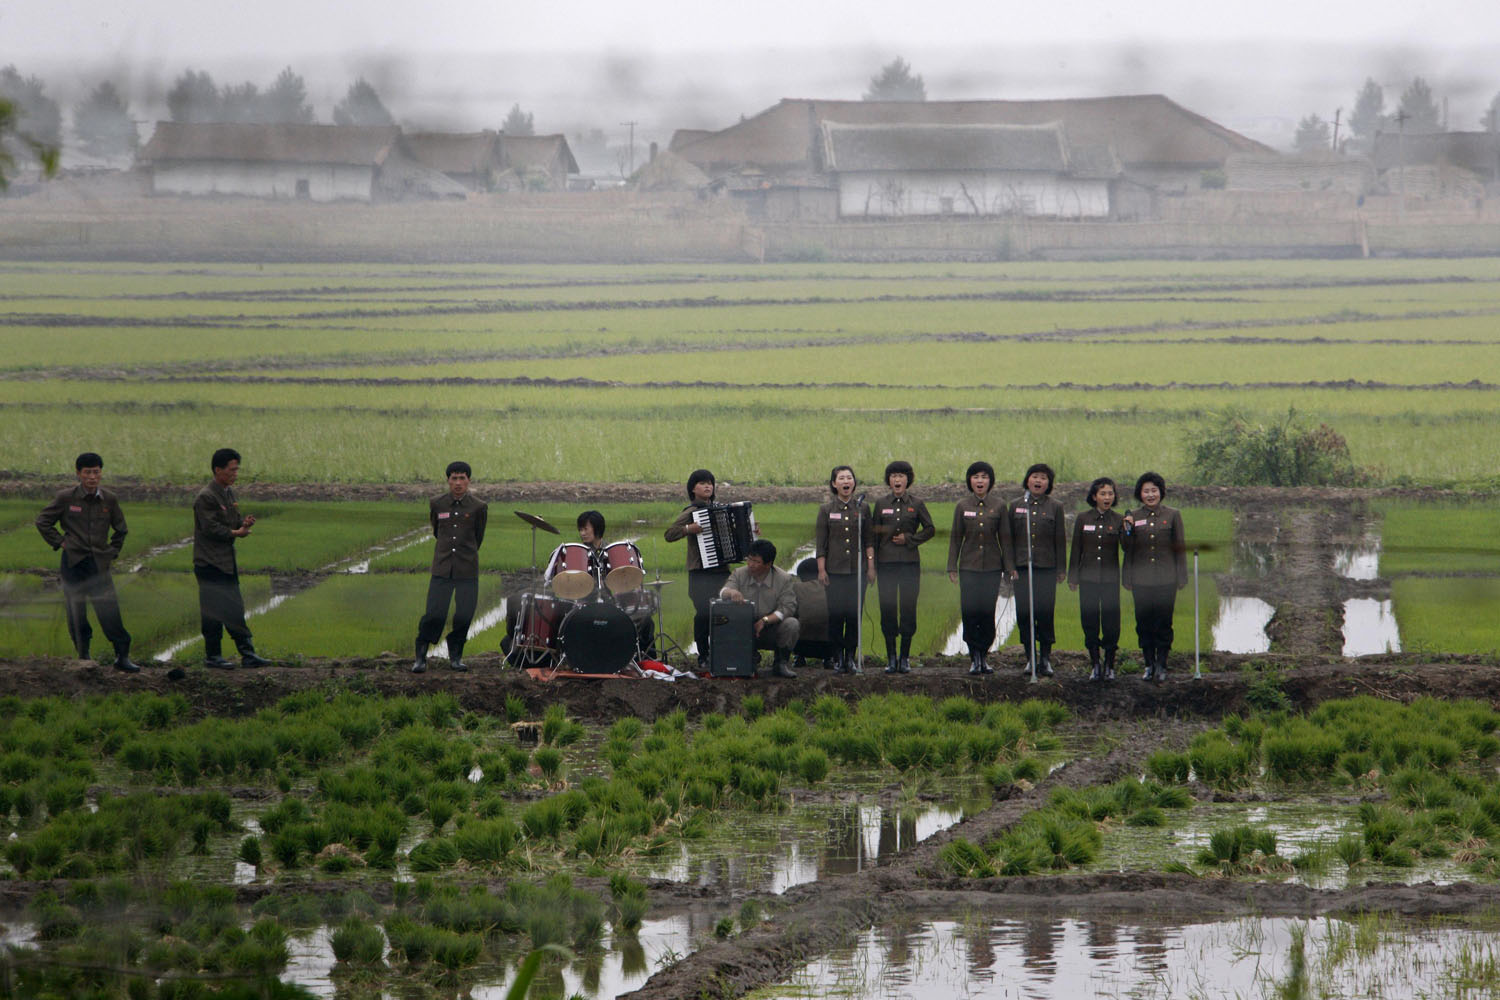 June 6, 2012. A music group performs on a path amid fields to greet the farmers at Hwanggumpyong Island, near the North Korean town of Sinuiju and the Chinese border city of Dandong.